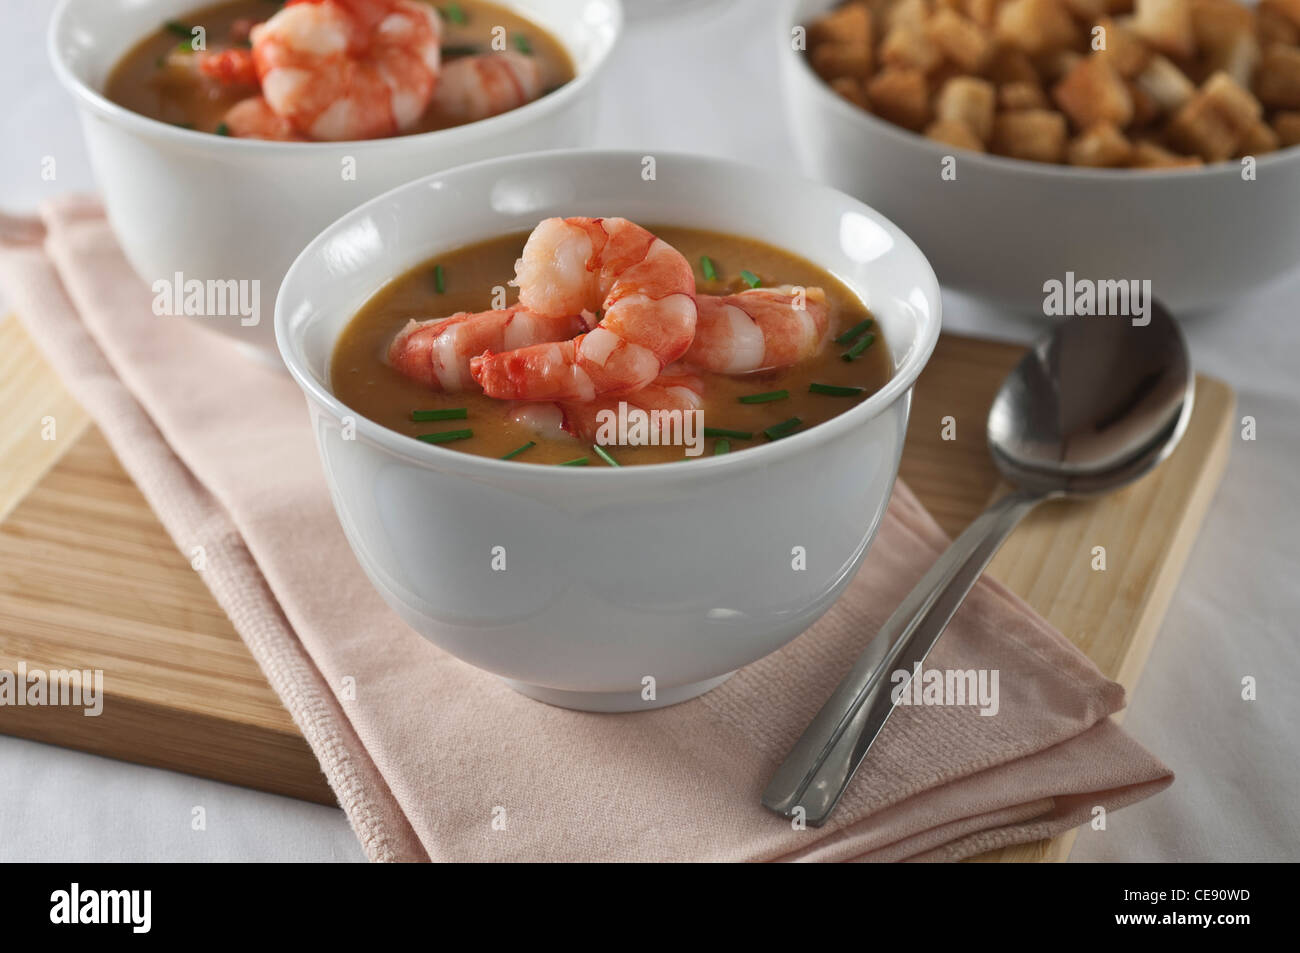 Seafood bisque with croutons. Prawn shrimp shellfish soup. Stock Photo